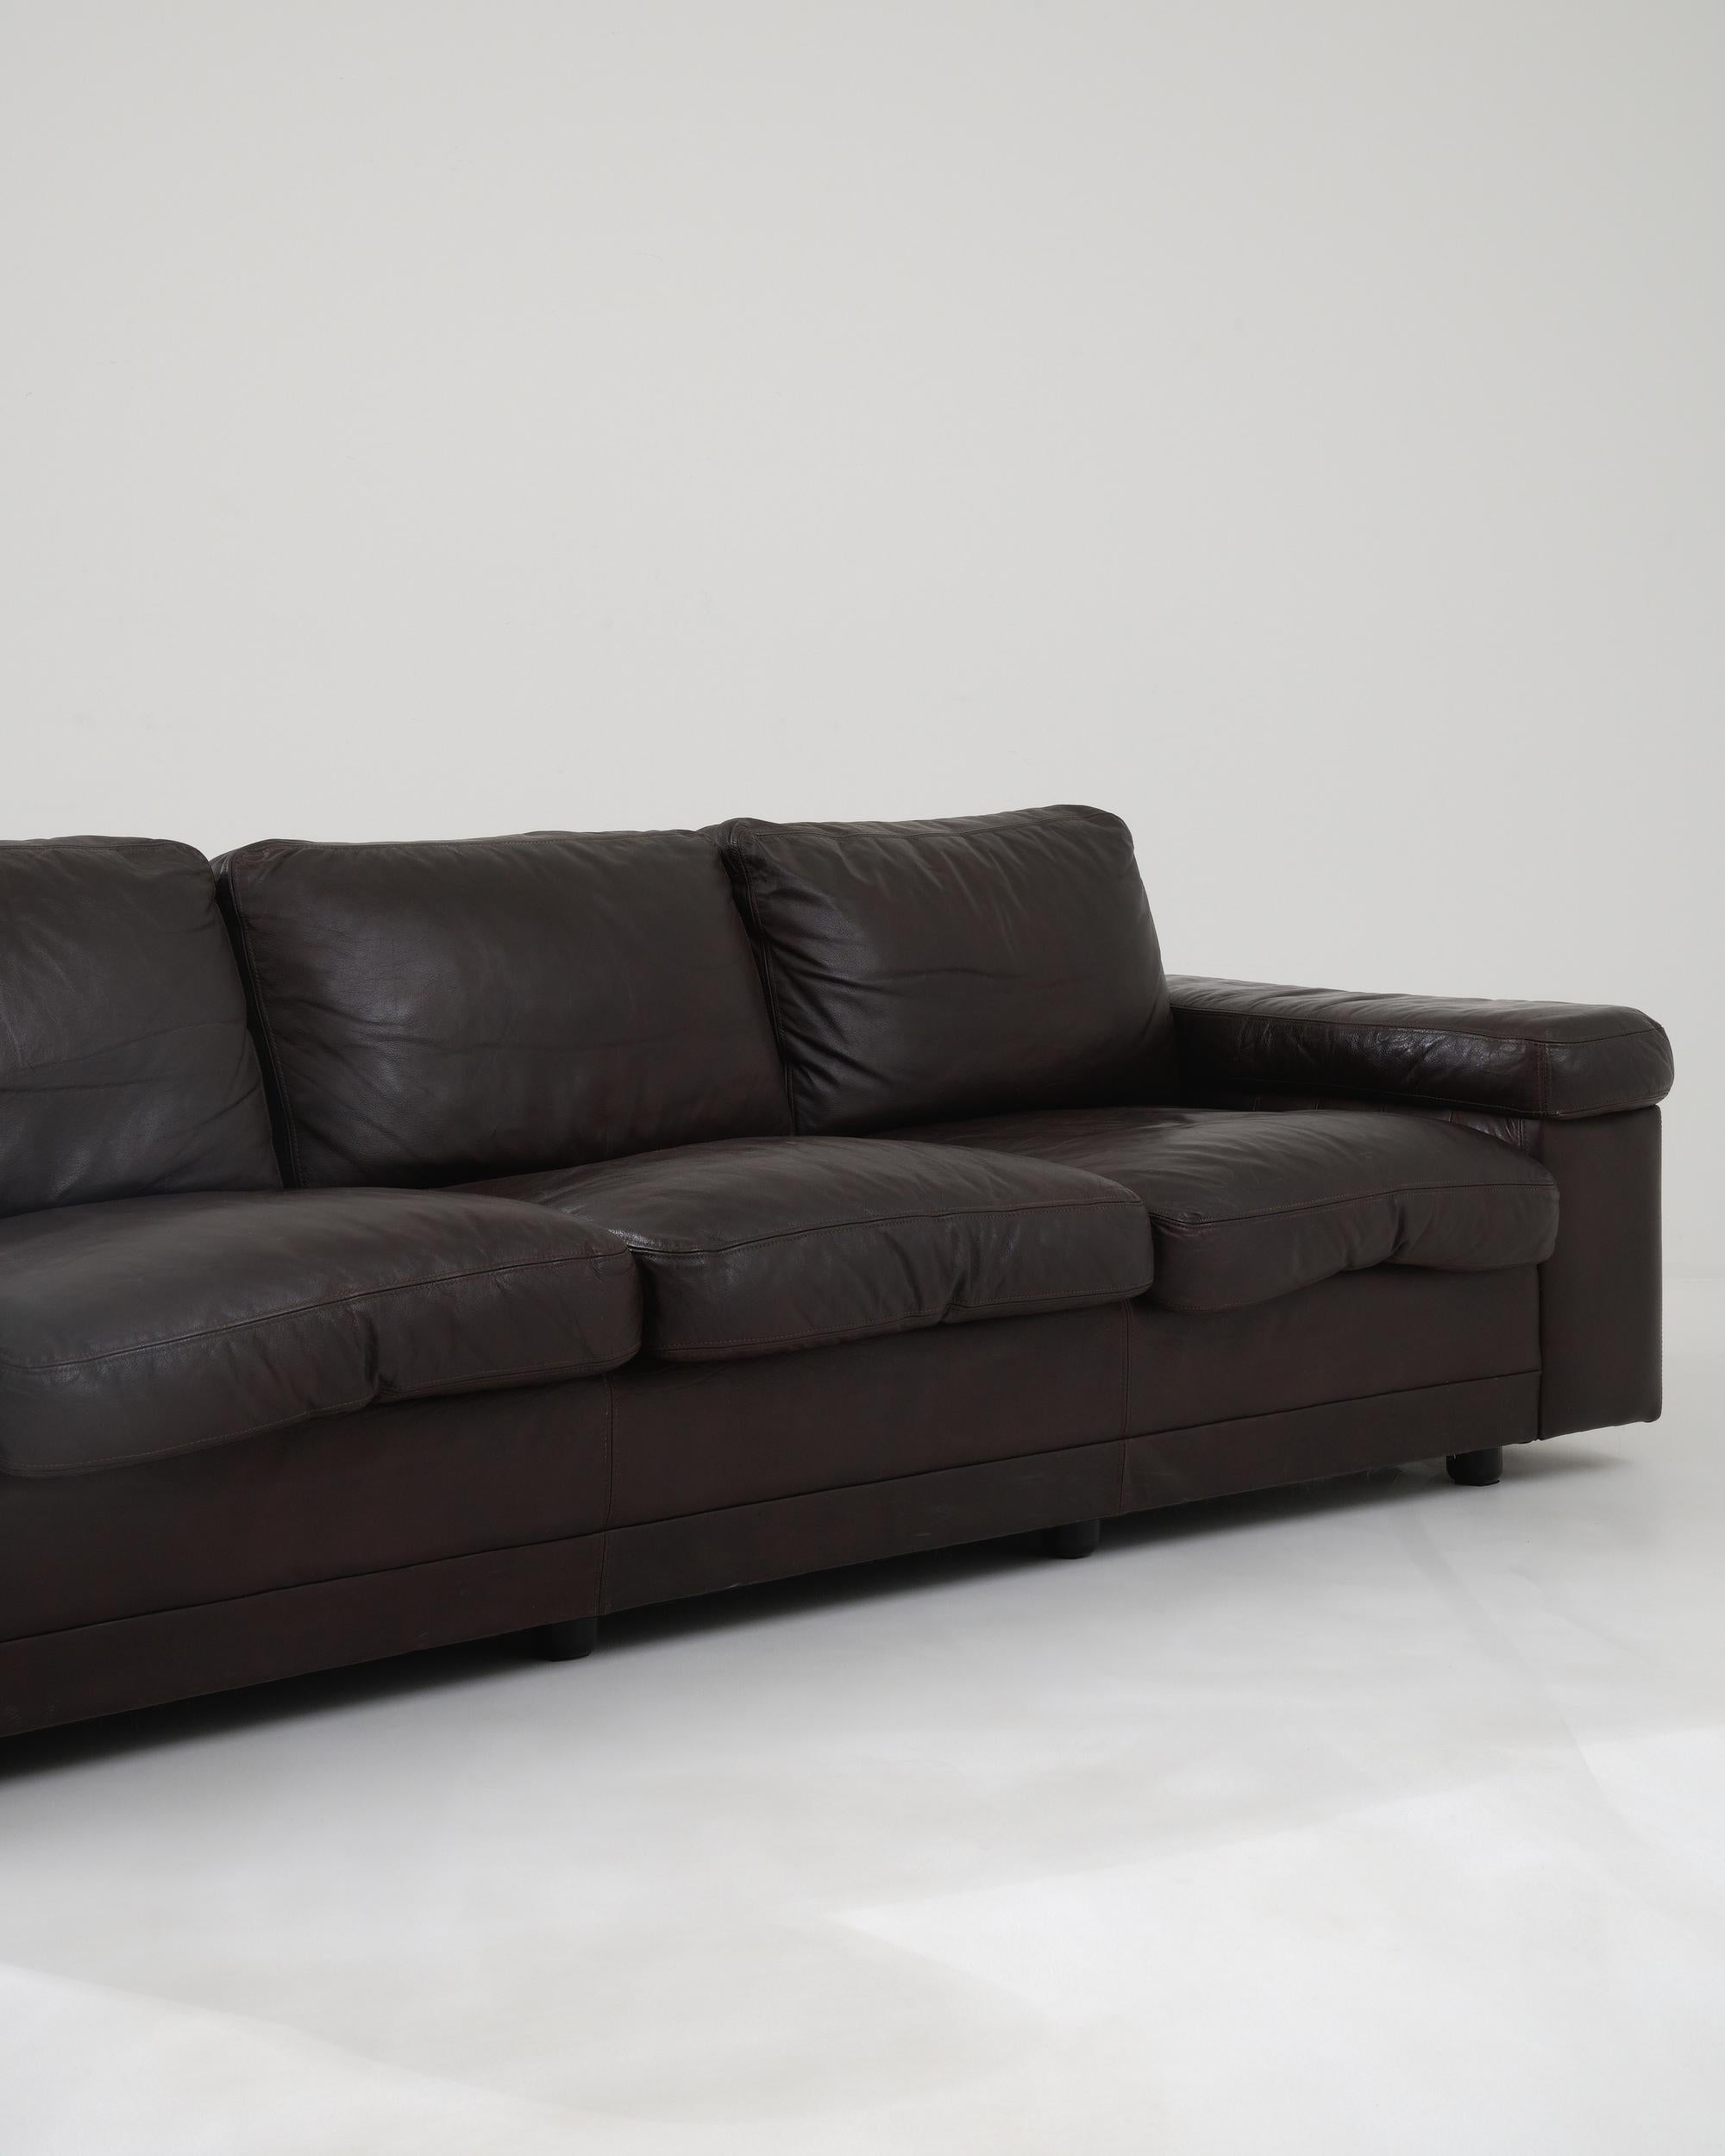 20th Century German Upholstered Leather Sofa In Good Condition For Sale In High Point, NC